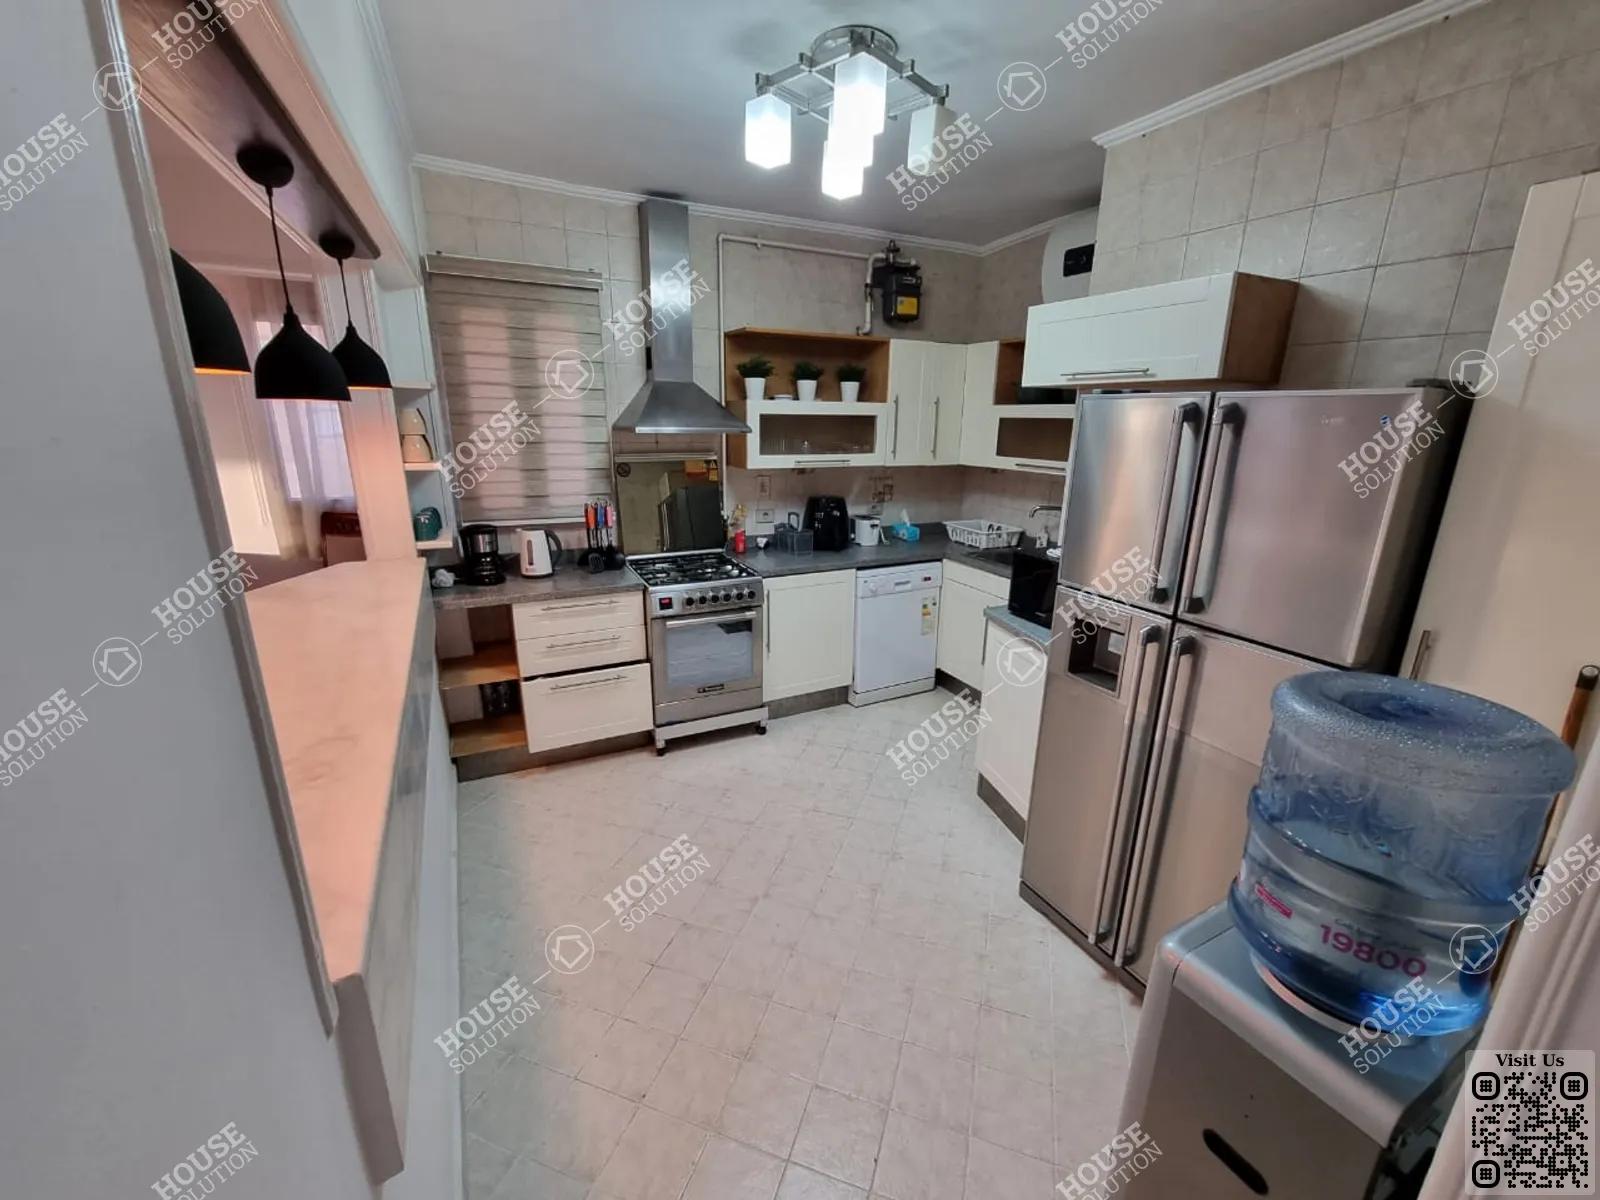 KITCHEN  @ Apartments For Rent In Maadi Maadi Degla Area: 320 m² consists of 3 Bedrooms 2 Bathrooms Modern furnished 5 stars #3498-2